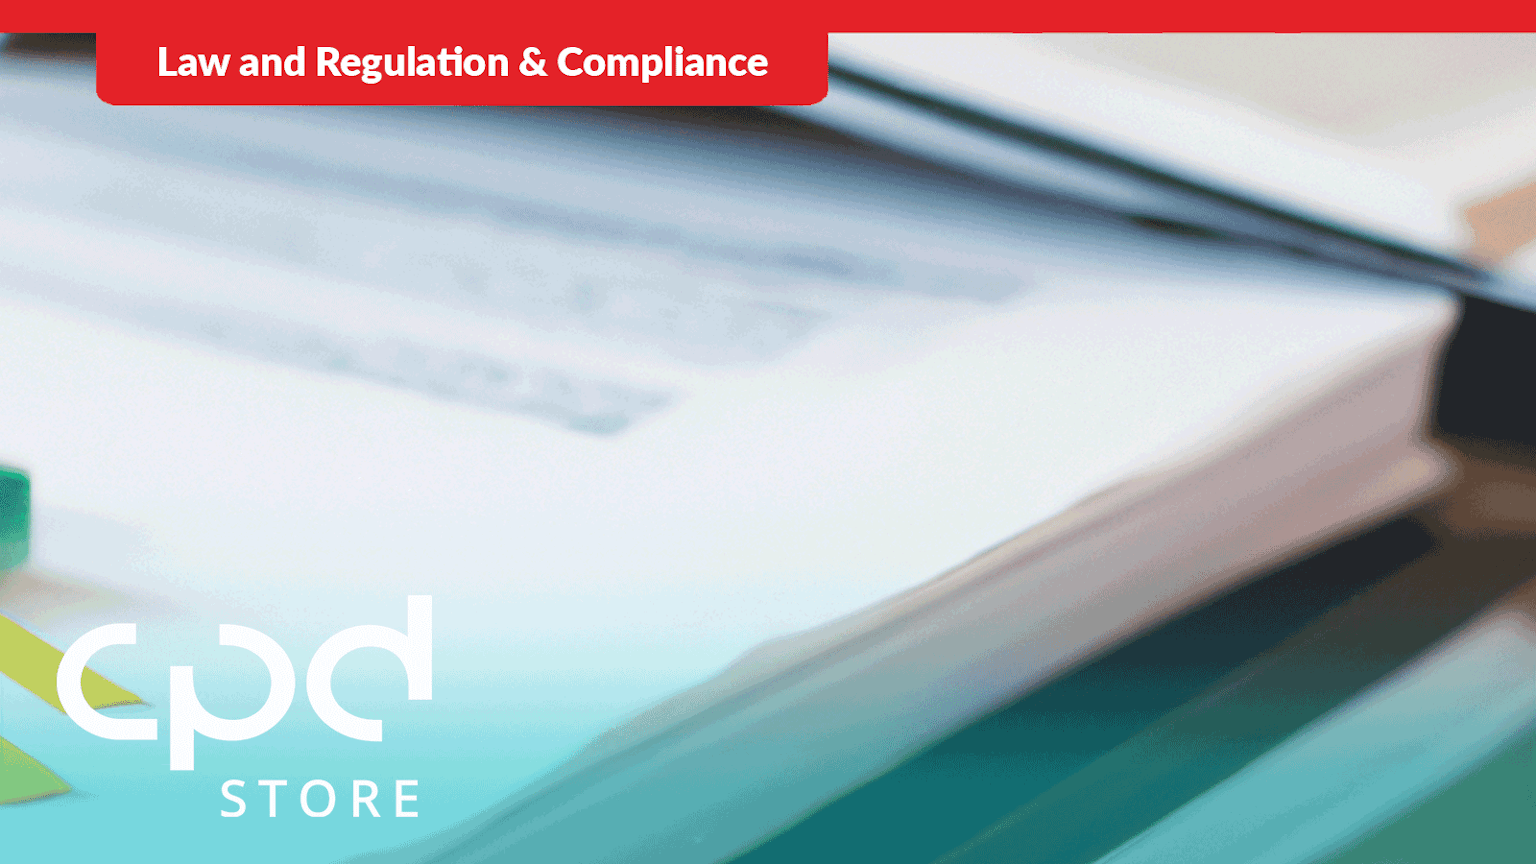 Cover Image for Filing Discrepancies and Non-Compliance for RBO: A Must-Read for Accountants